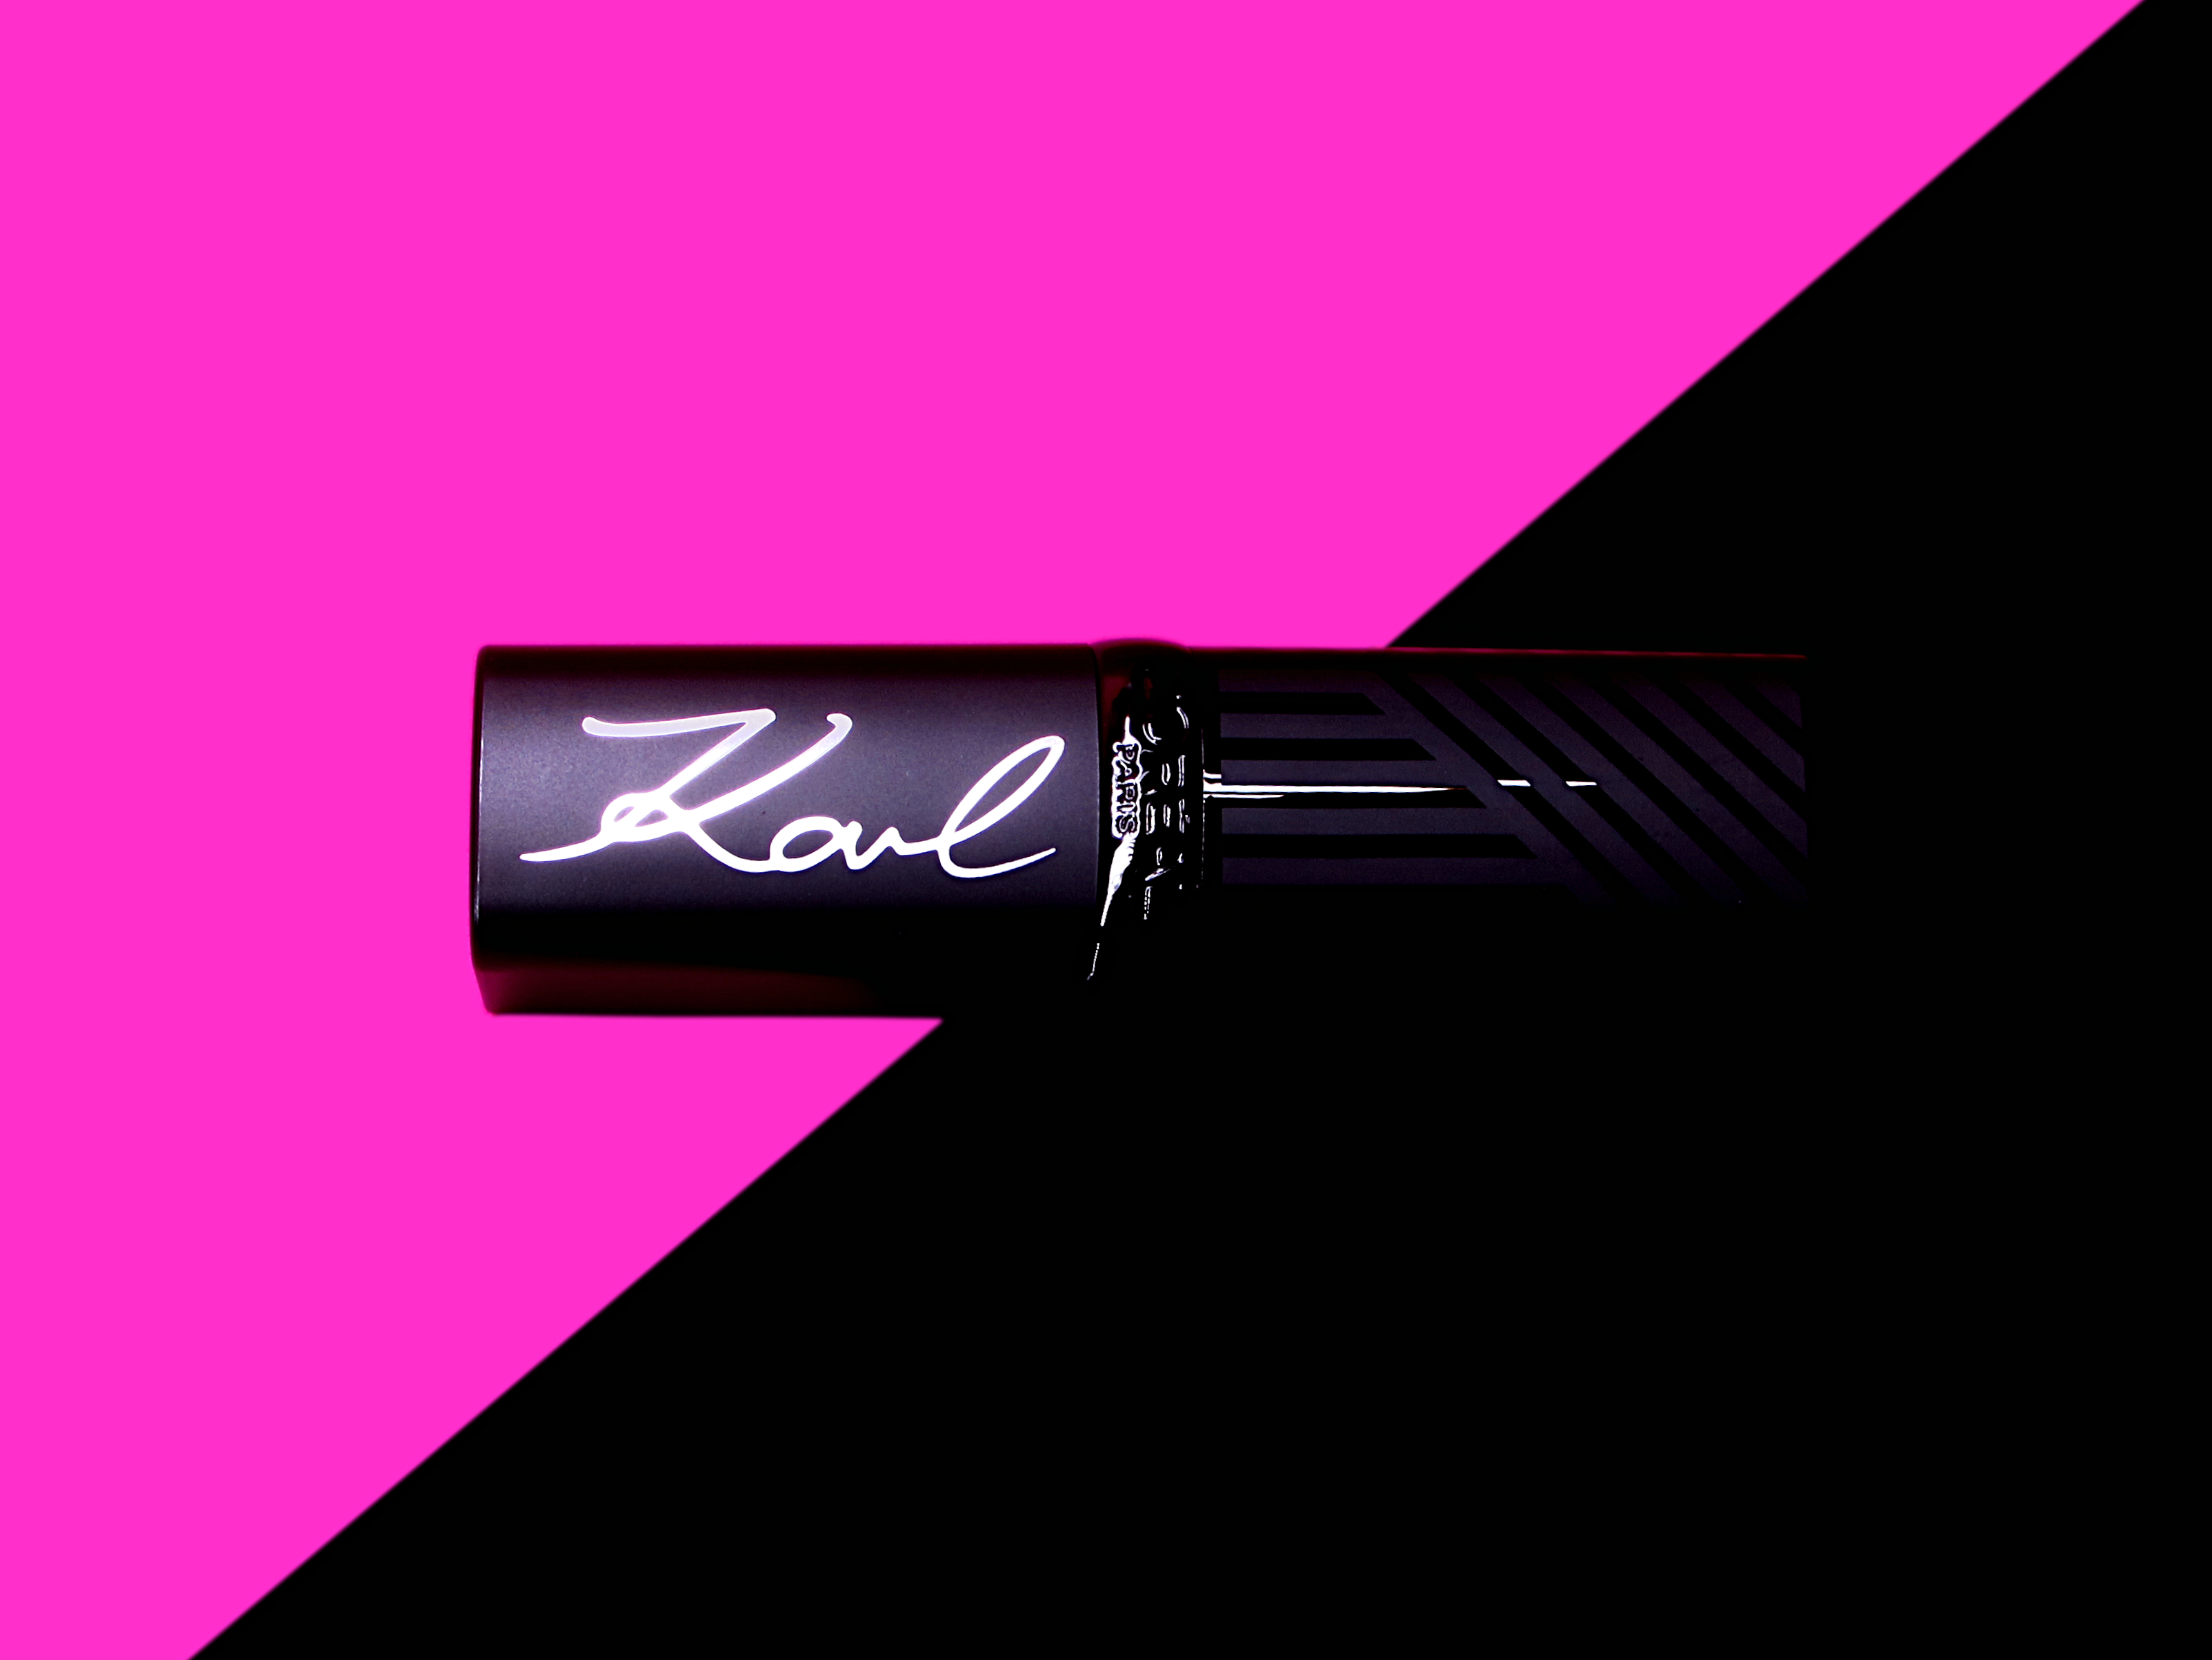 L'Oréal Paris x Karl Lagerfeld Limited Edition Collection in IroniK.